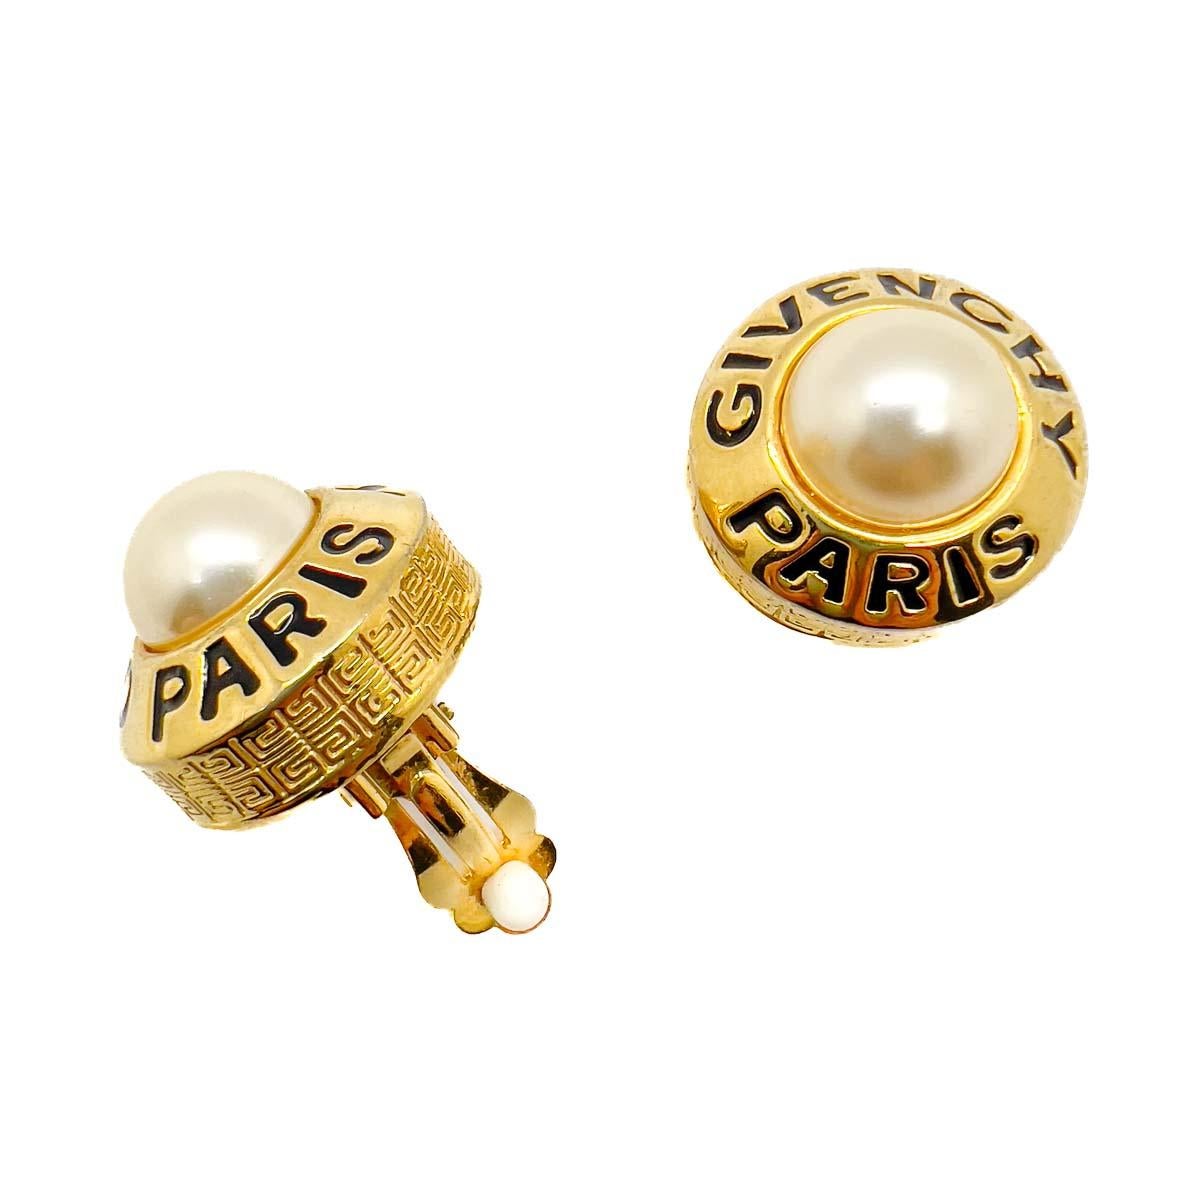 A fabulous pair of Vintage Givenchy Pearl Logo Earrings. A double couture classic, pearls and logo feature boldly in the design of these cool yet elegant earrings from the House. Guaranteed to amp up look.
One of the late great 20th century